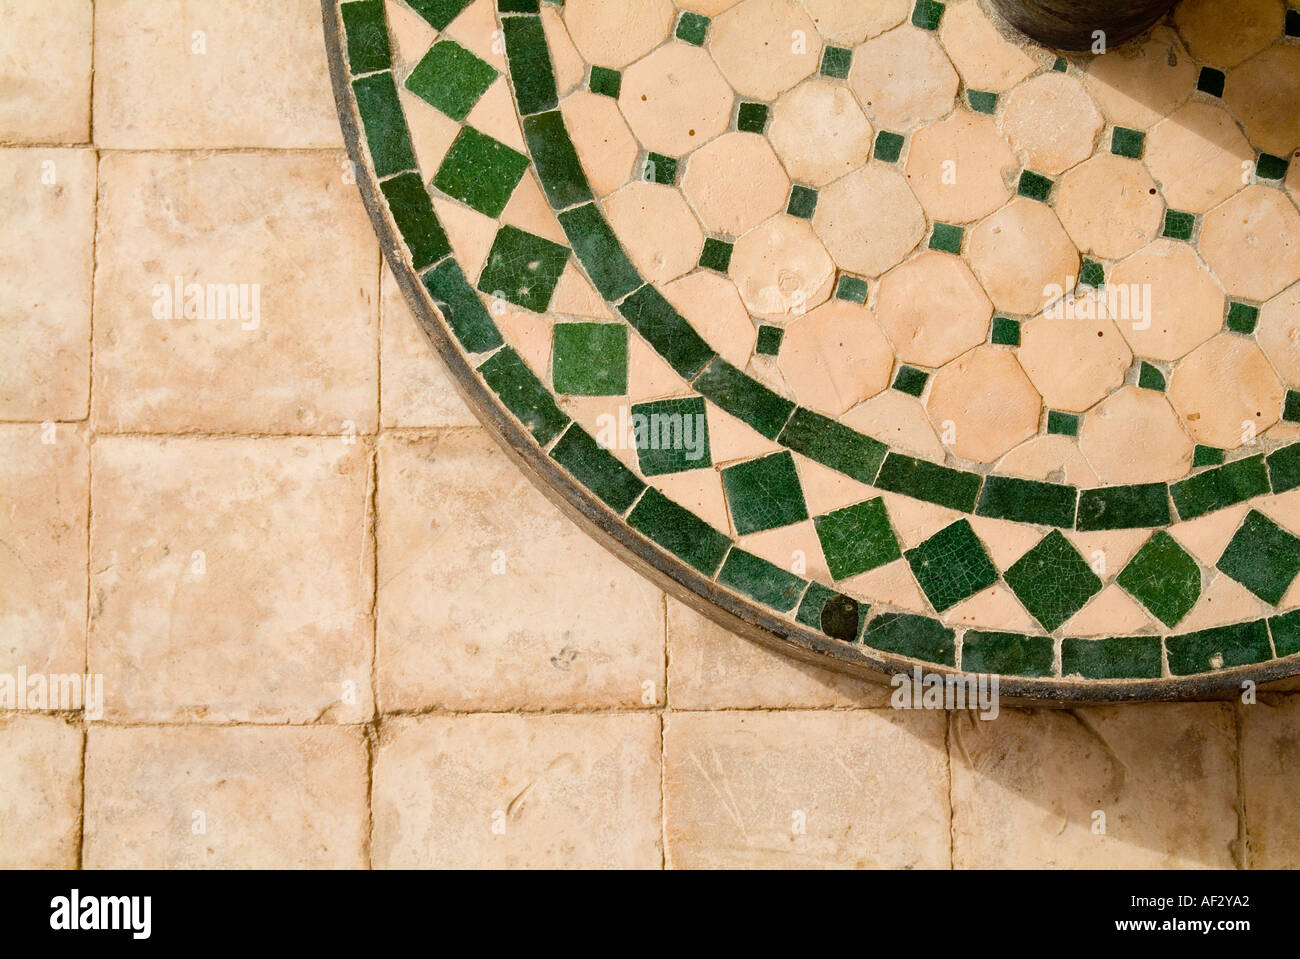 Luxury villa, Marrakesh, Morocco, close of up abstract photograph of ceramic tiles on patio Stock Photo